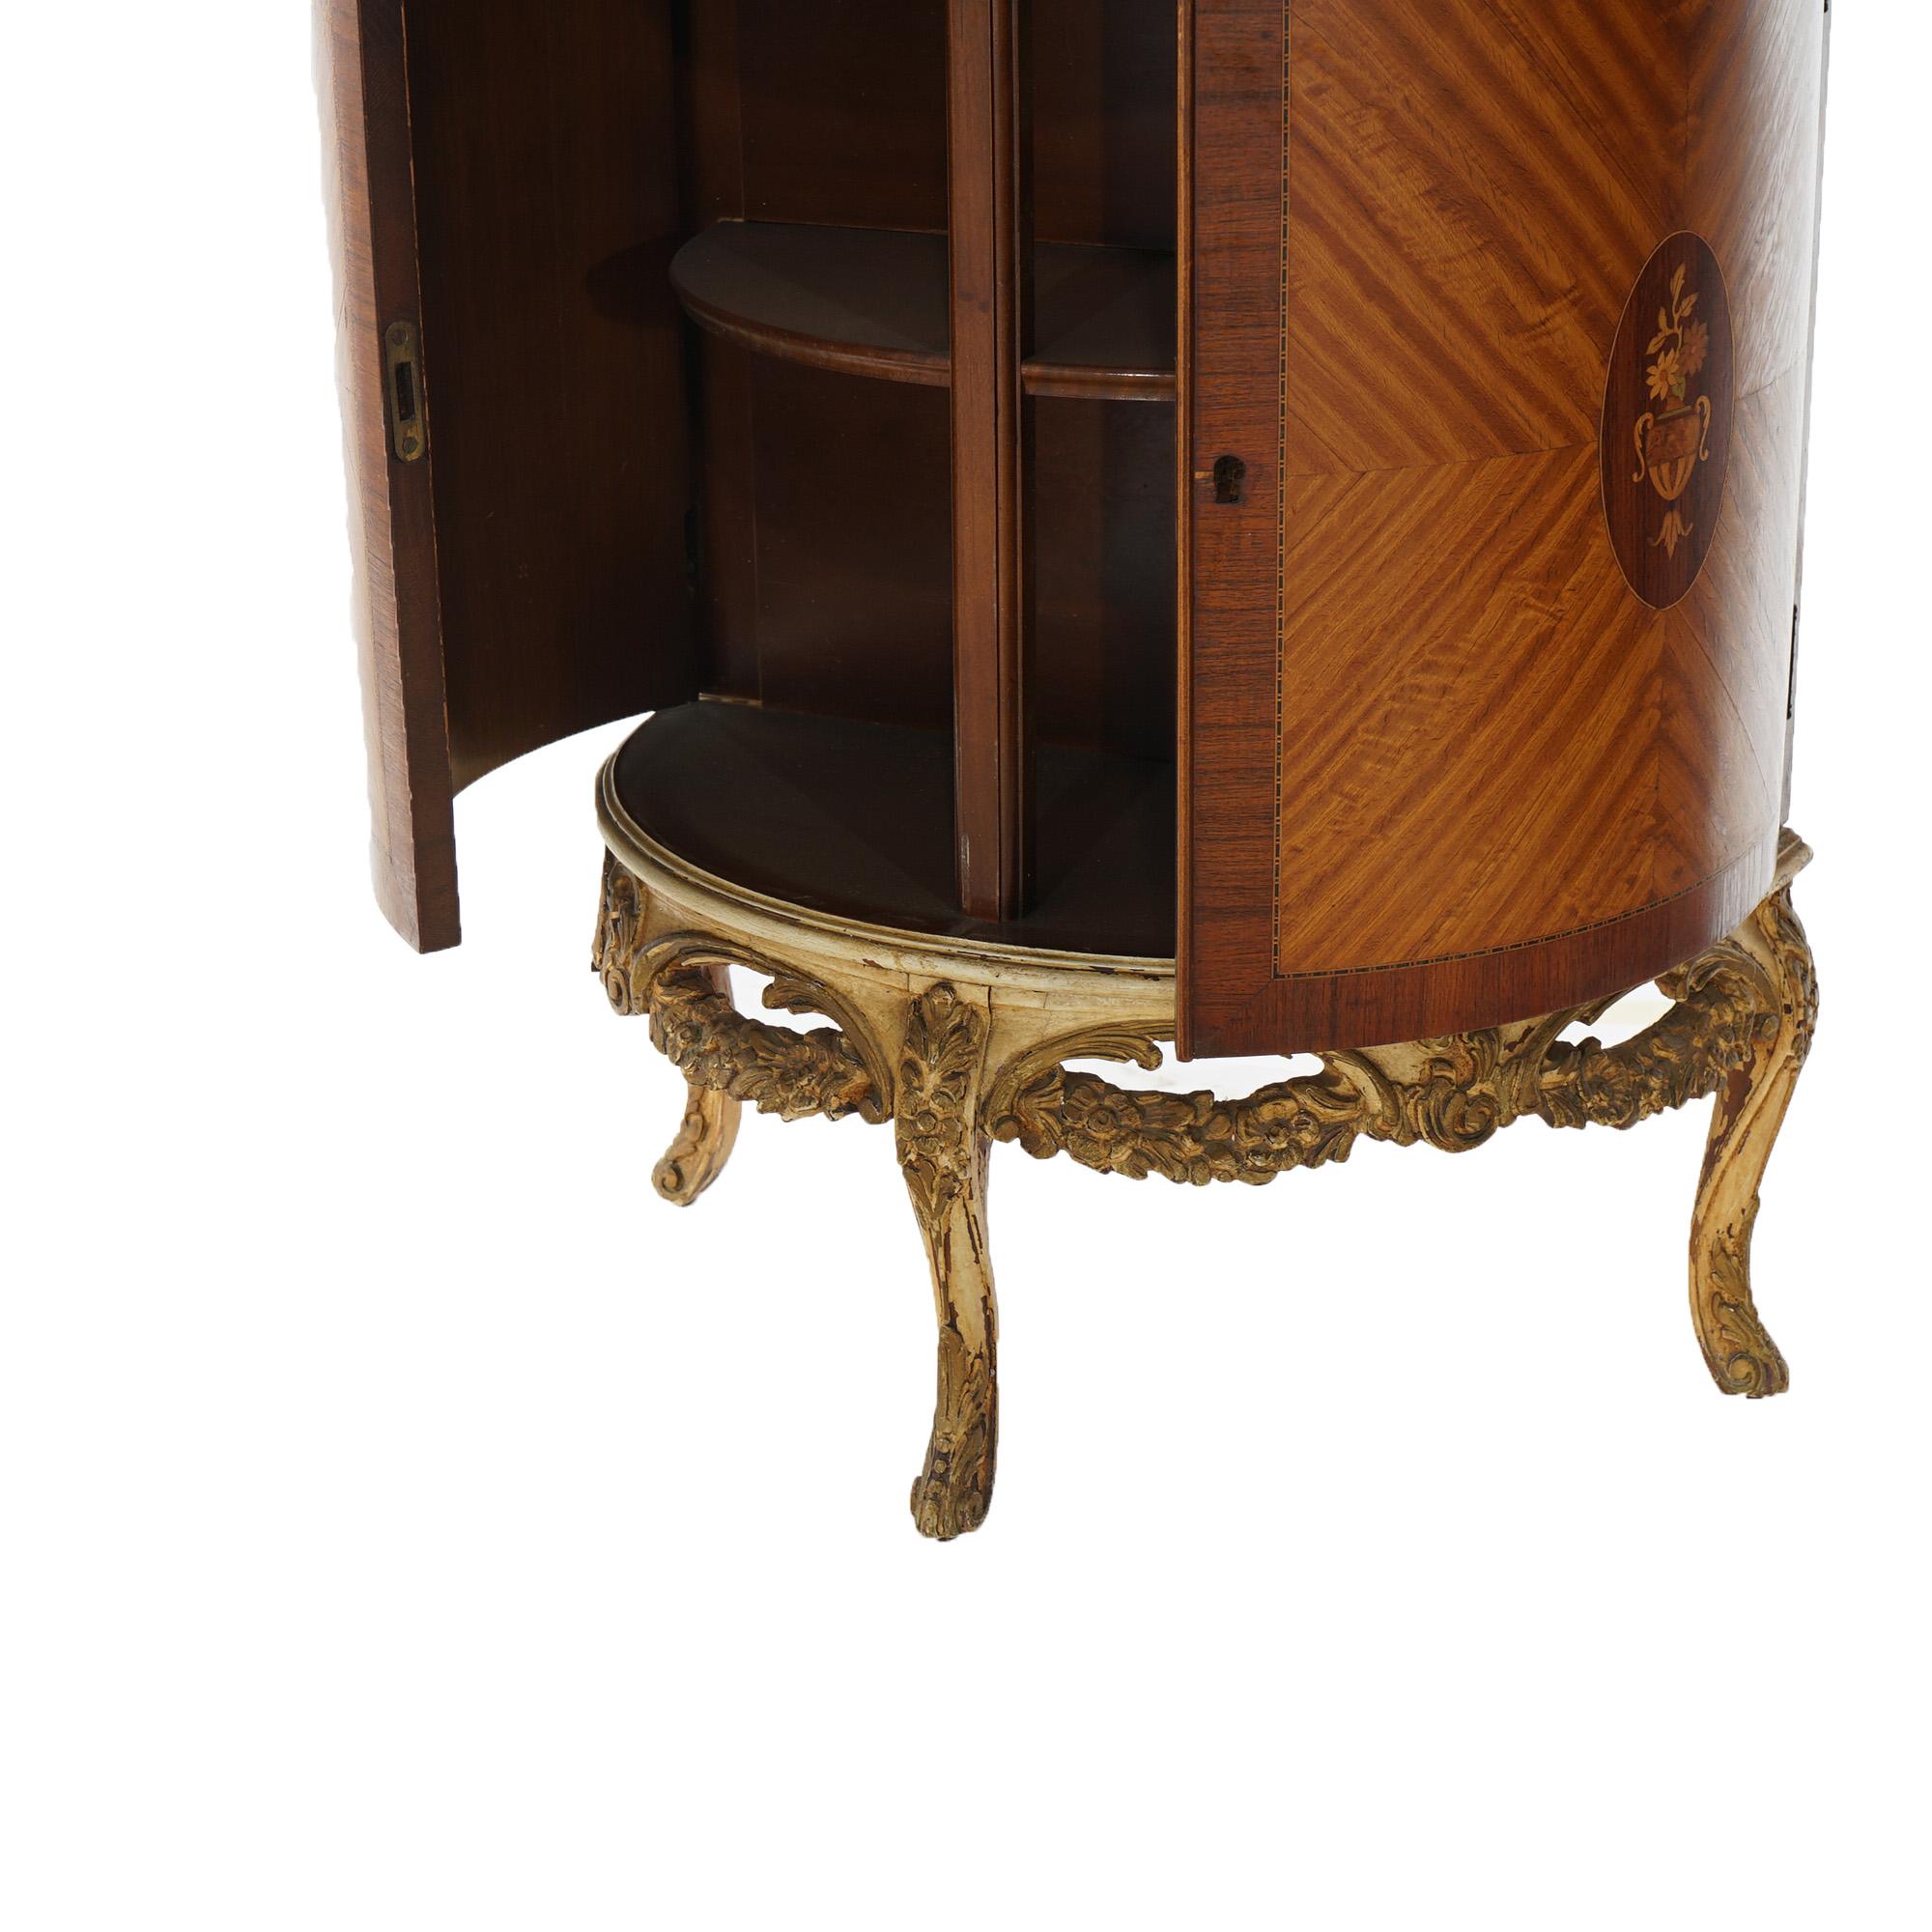 Two Antique Antique French Satinwood Inlaid Marquetry Demilune Side Tables C1920 For Sale 4